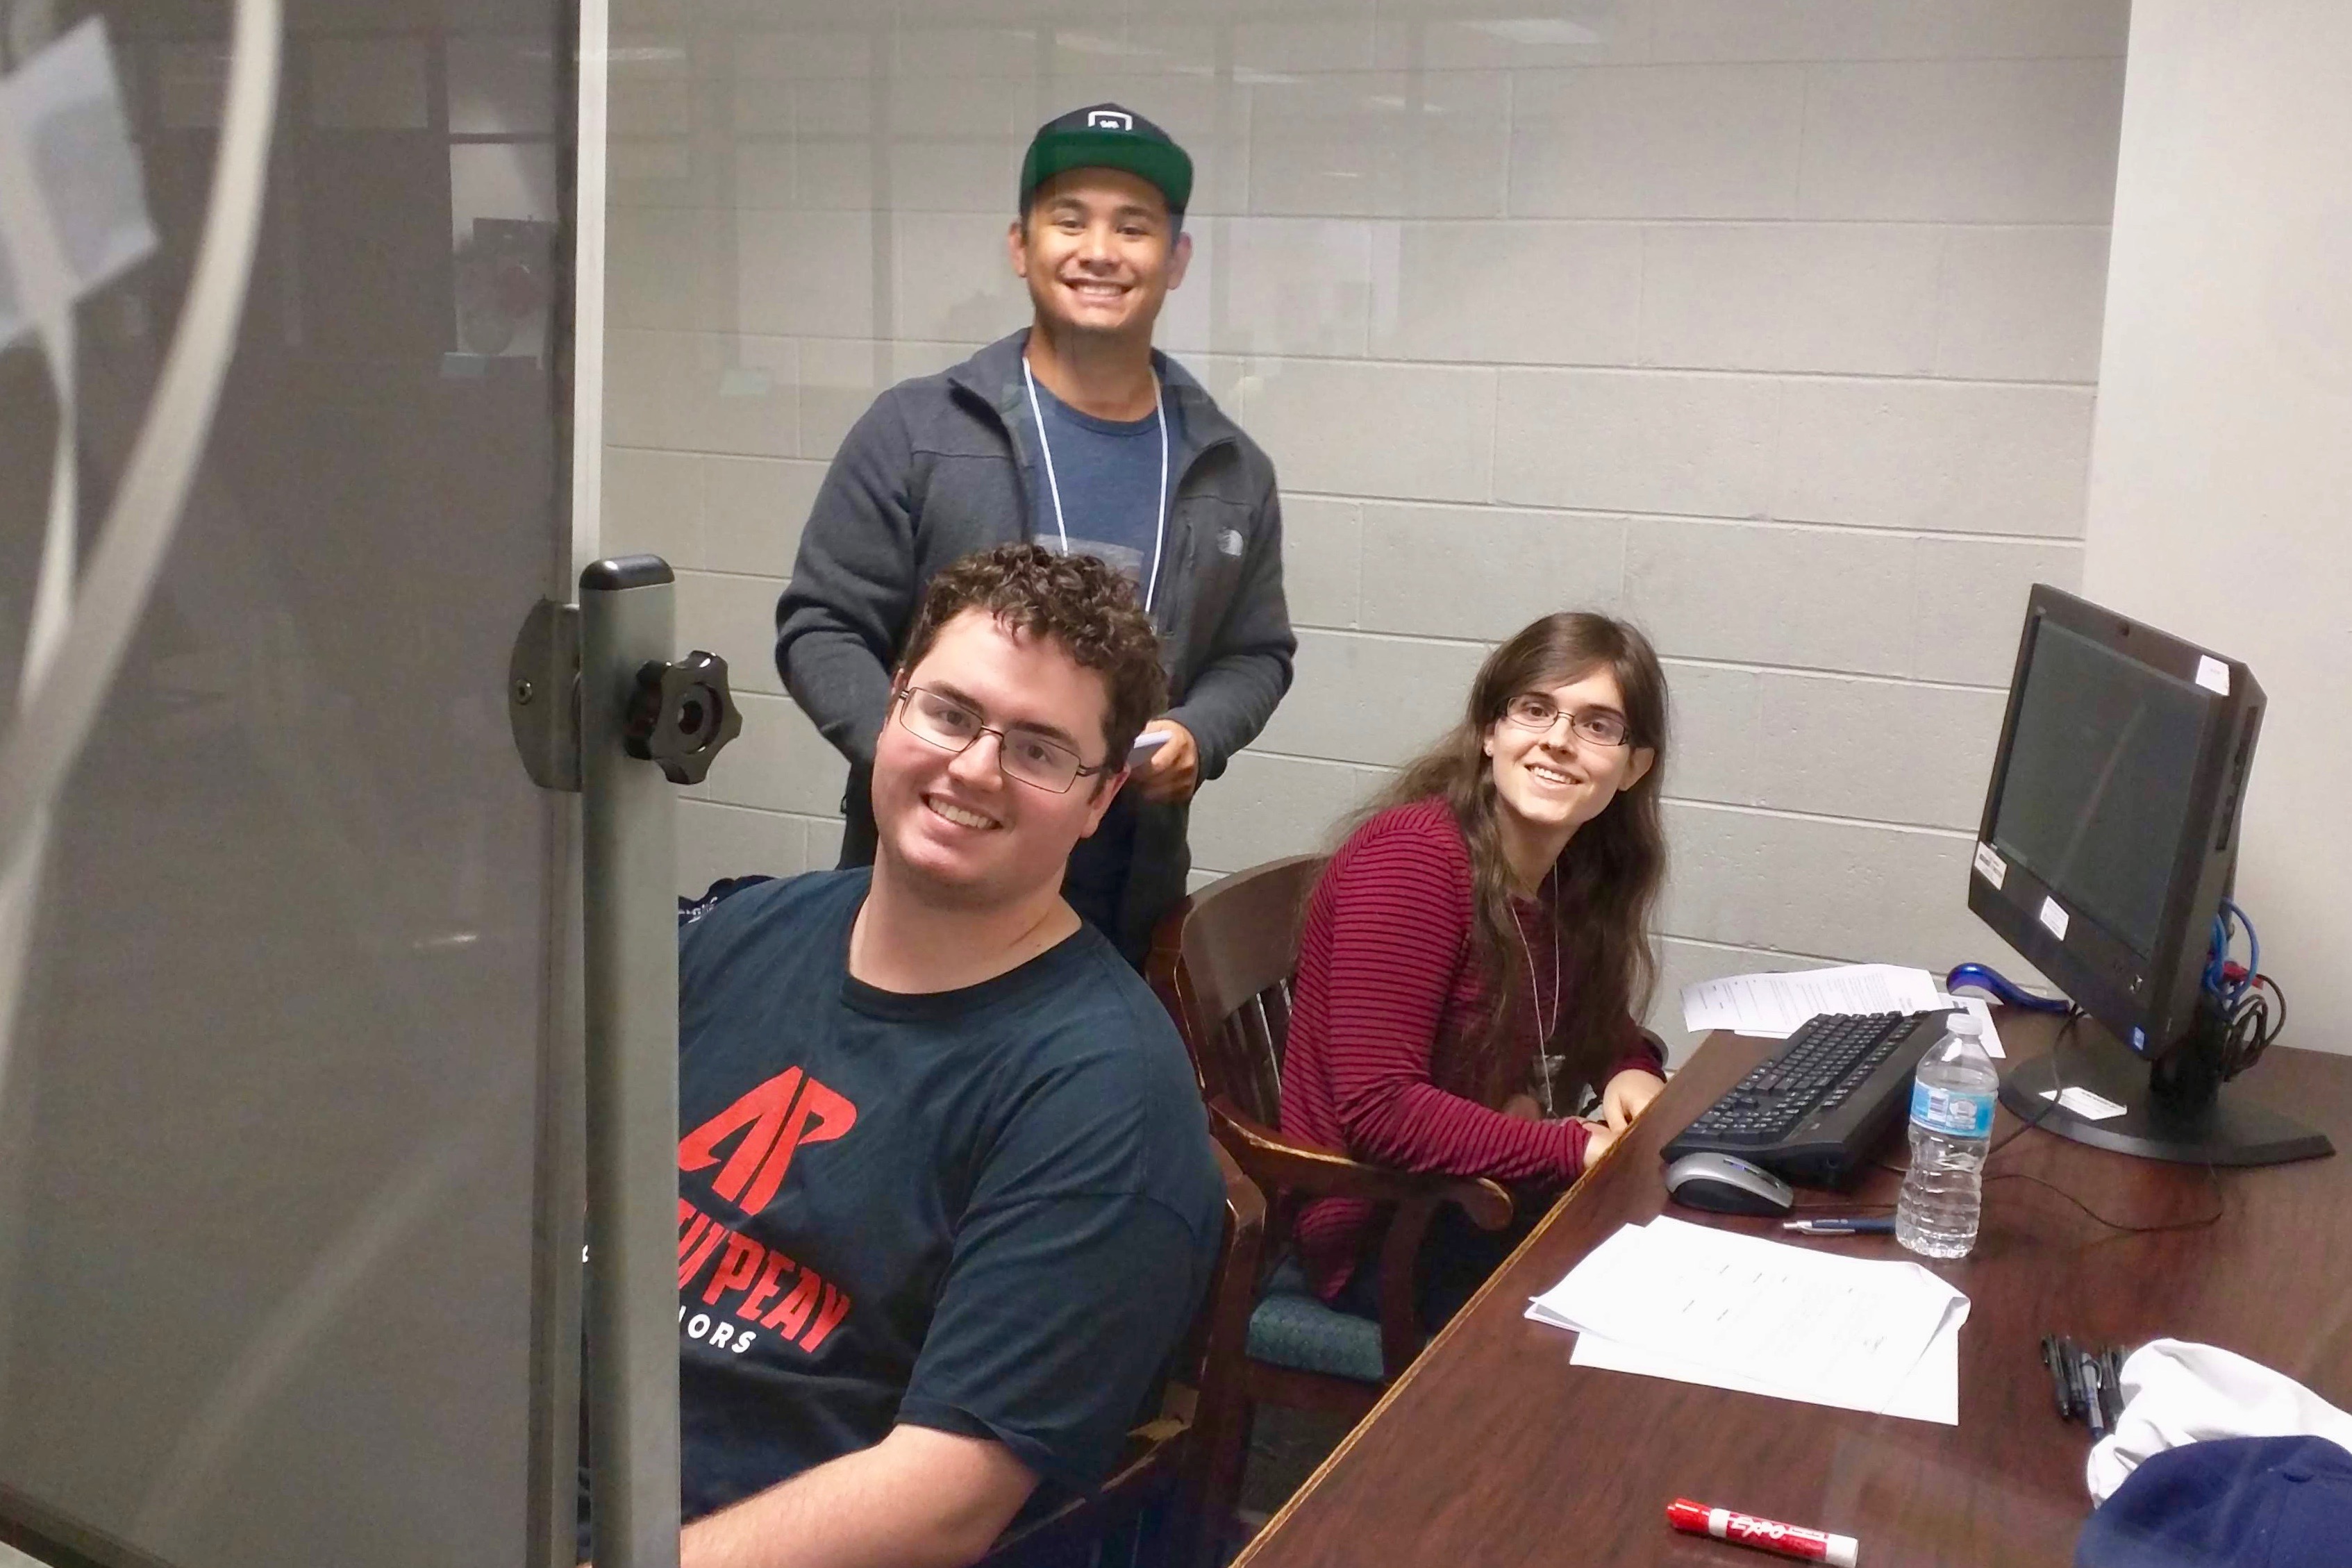 Harrison Welch, front, Chris Tuncap and Lexie Nance were members of Austin Peay team “null” at the University of Tennessee at Martin site of the International Collegiate Programming Contest. The team finished second at the site. - photo by Dr. James Church, APSU